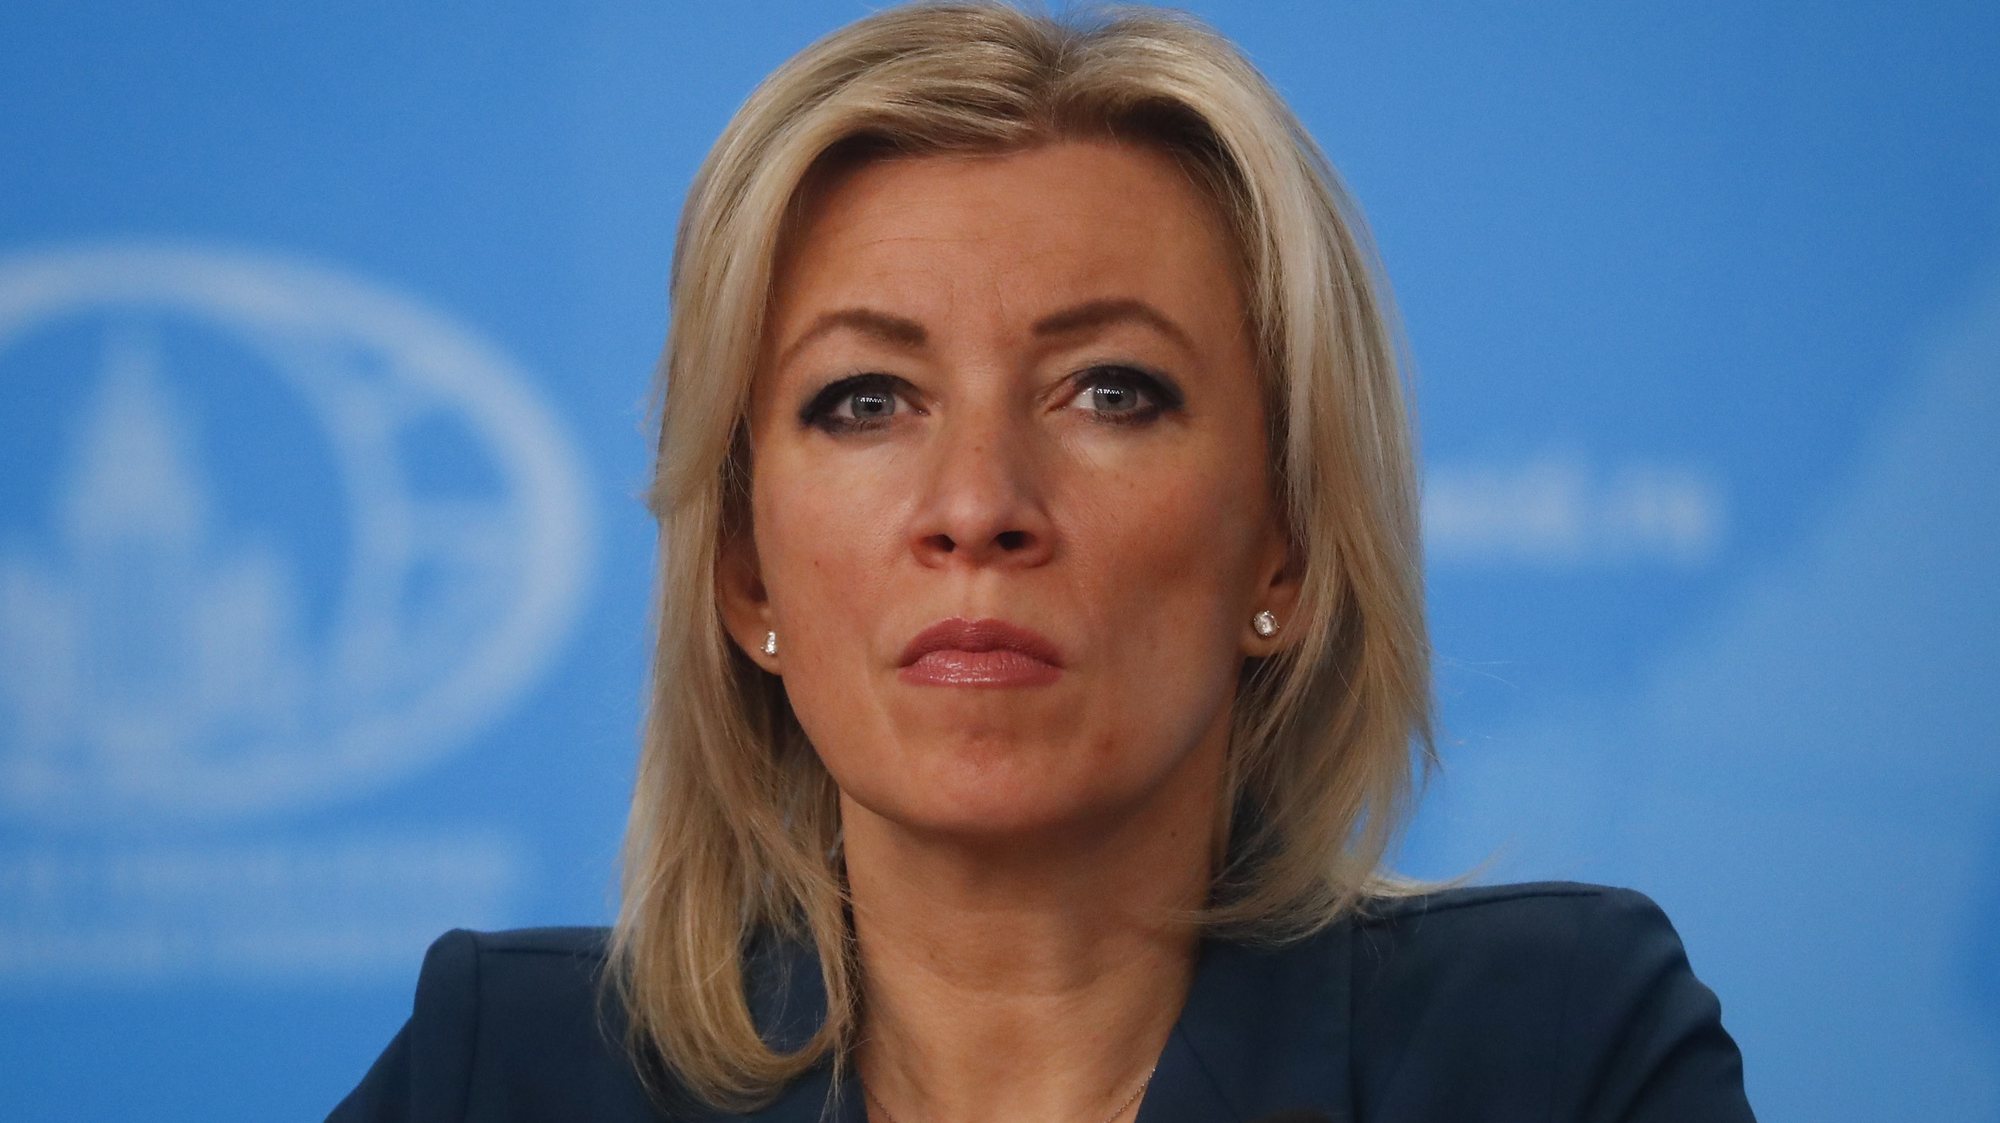 epa09684642 Russian Foreign Ministry spokeswoman Maria Zakharova during a annual news conference of Russian Foreign Minister Sergei Lavrov in Moscow, Russia, 14 January 2022. Sergei Lavrov gave a ​press conference on the results of Russian diplomacy in 2021.  EPA/MAXIM SHIPENKOV